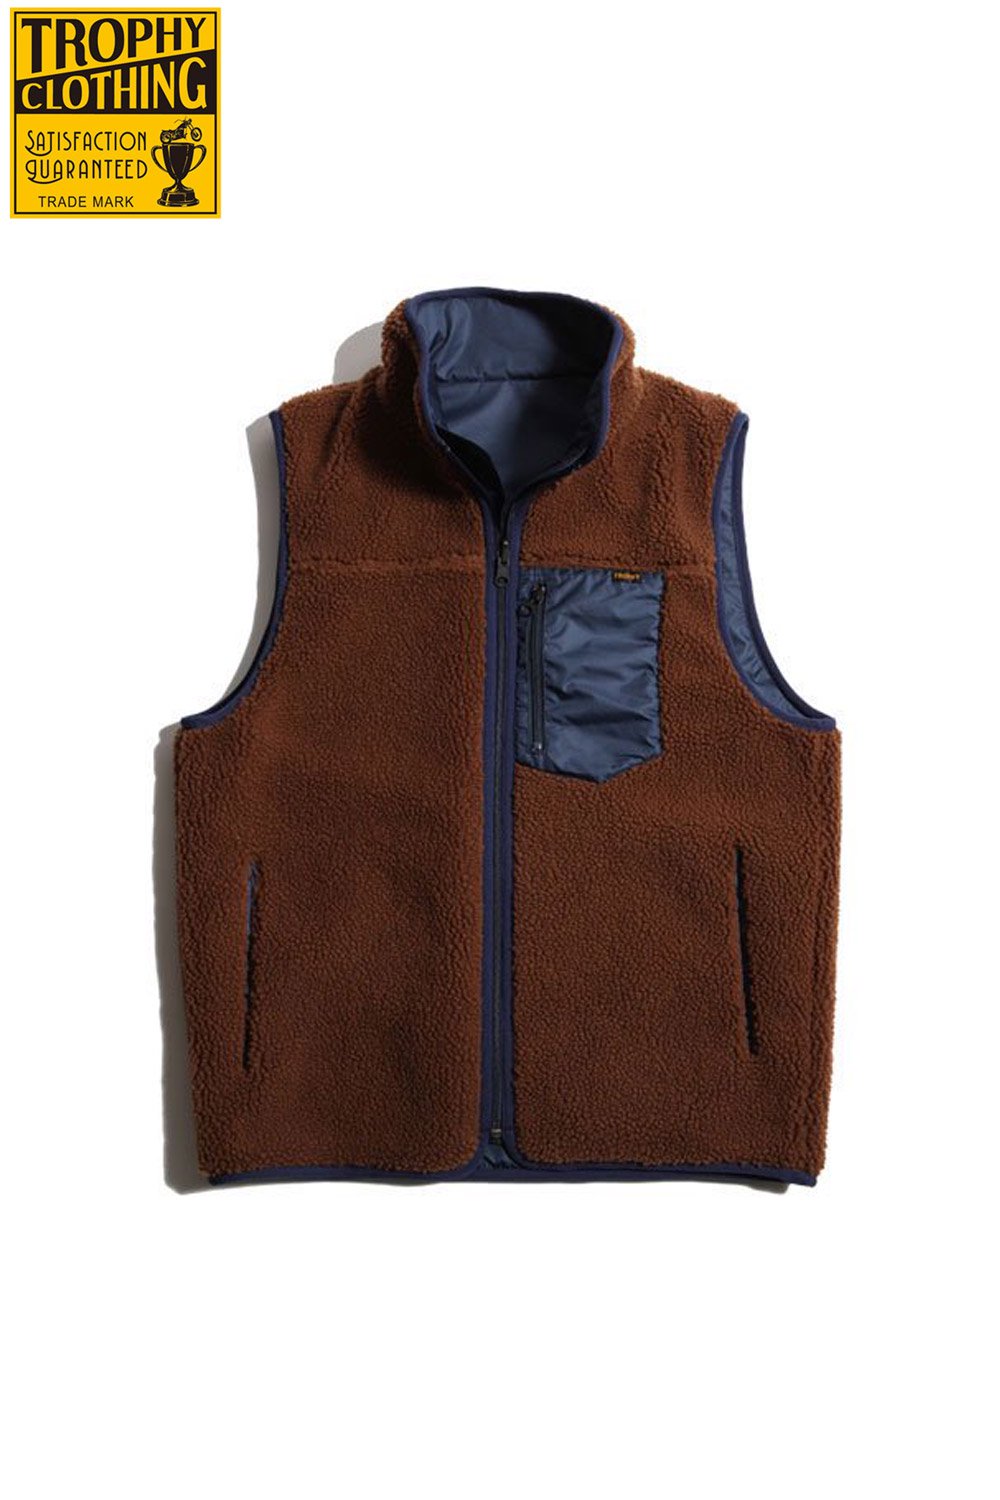 TROPHY CLOTHING(トロフィークロージング) マウンテンベスト 2FACE MOUNTAIN VEST TR21AW-301 通販正規取扱  | ハーレムストア公式通販サイト